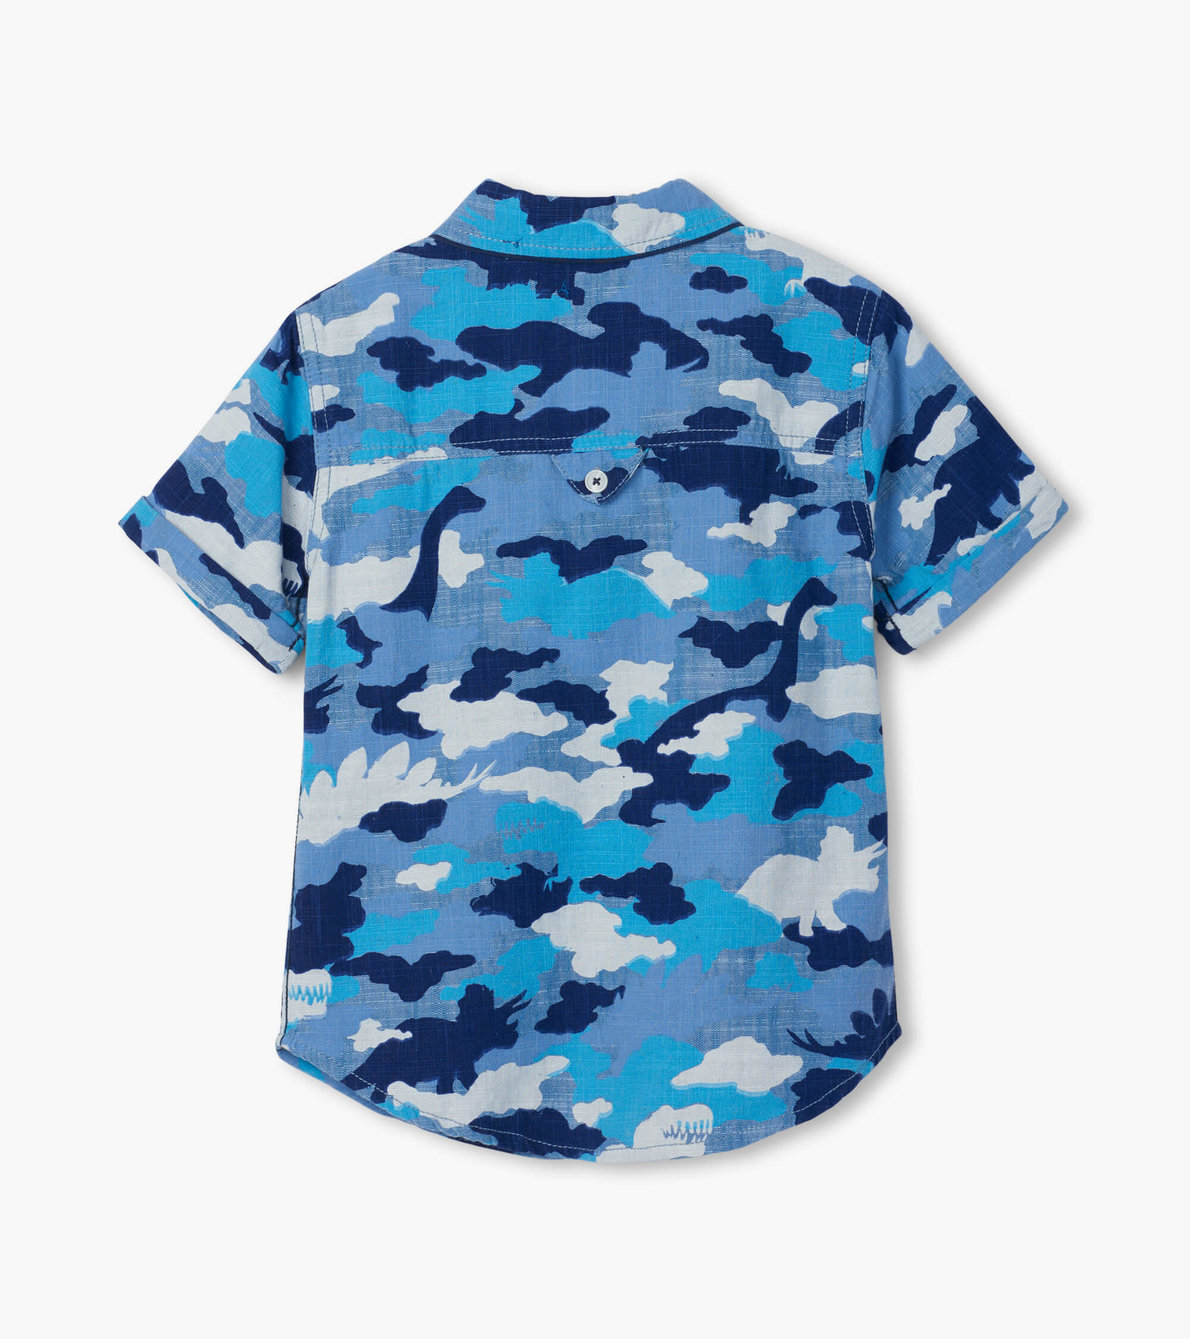 View larger image of Dino Camo Short Sleeve Button Down Shirt